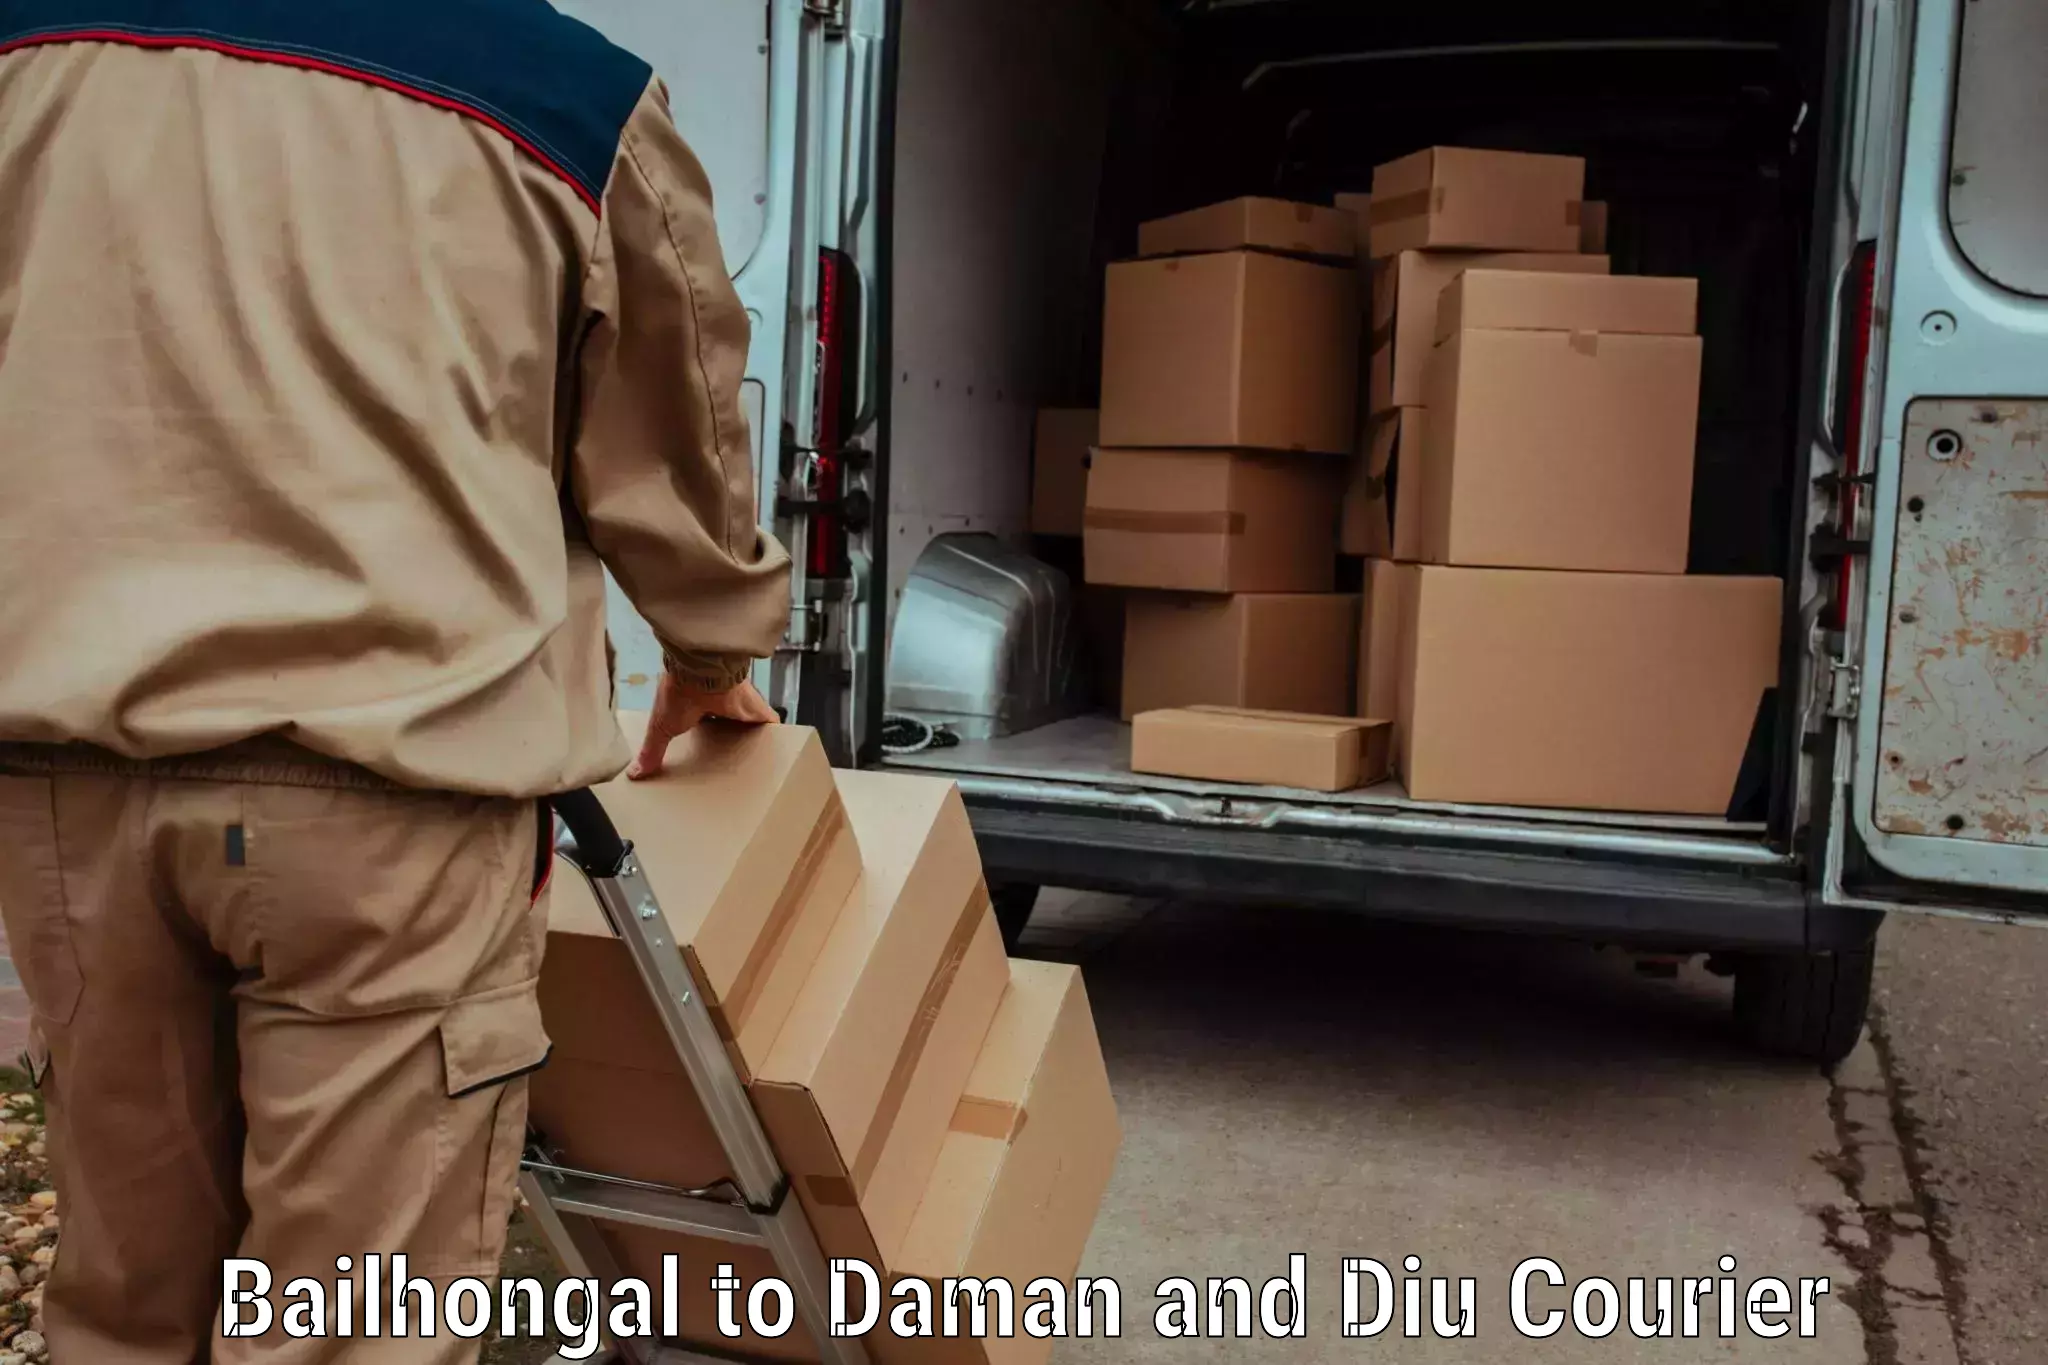 Cargo delivery service Bailhongal to Daman and Diu